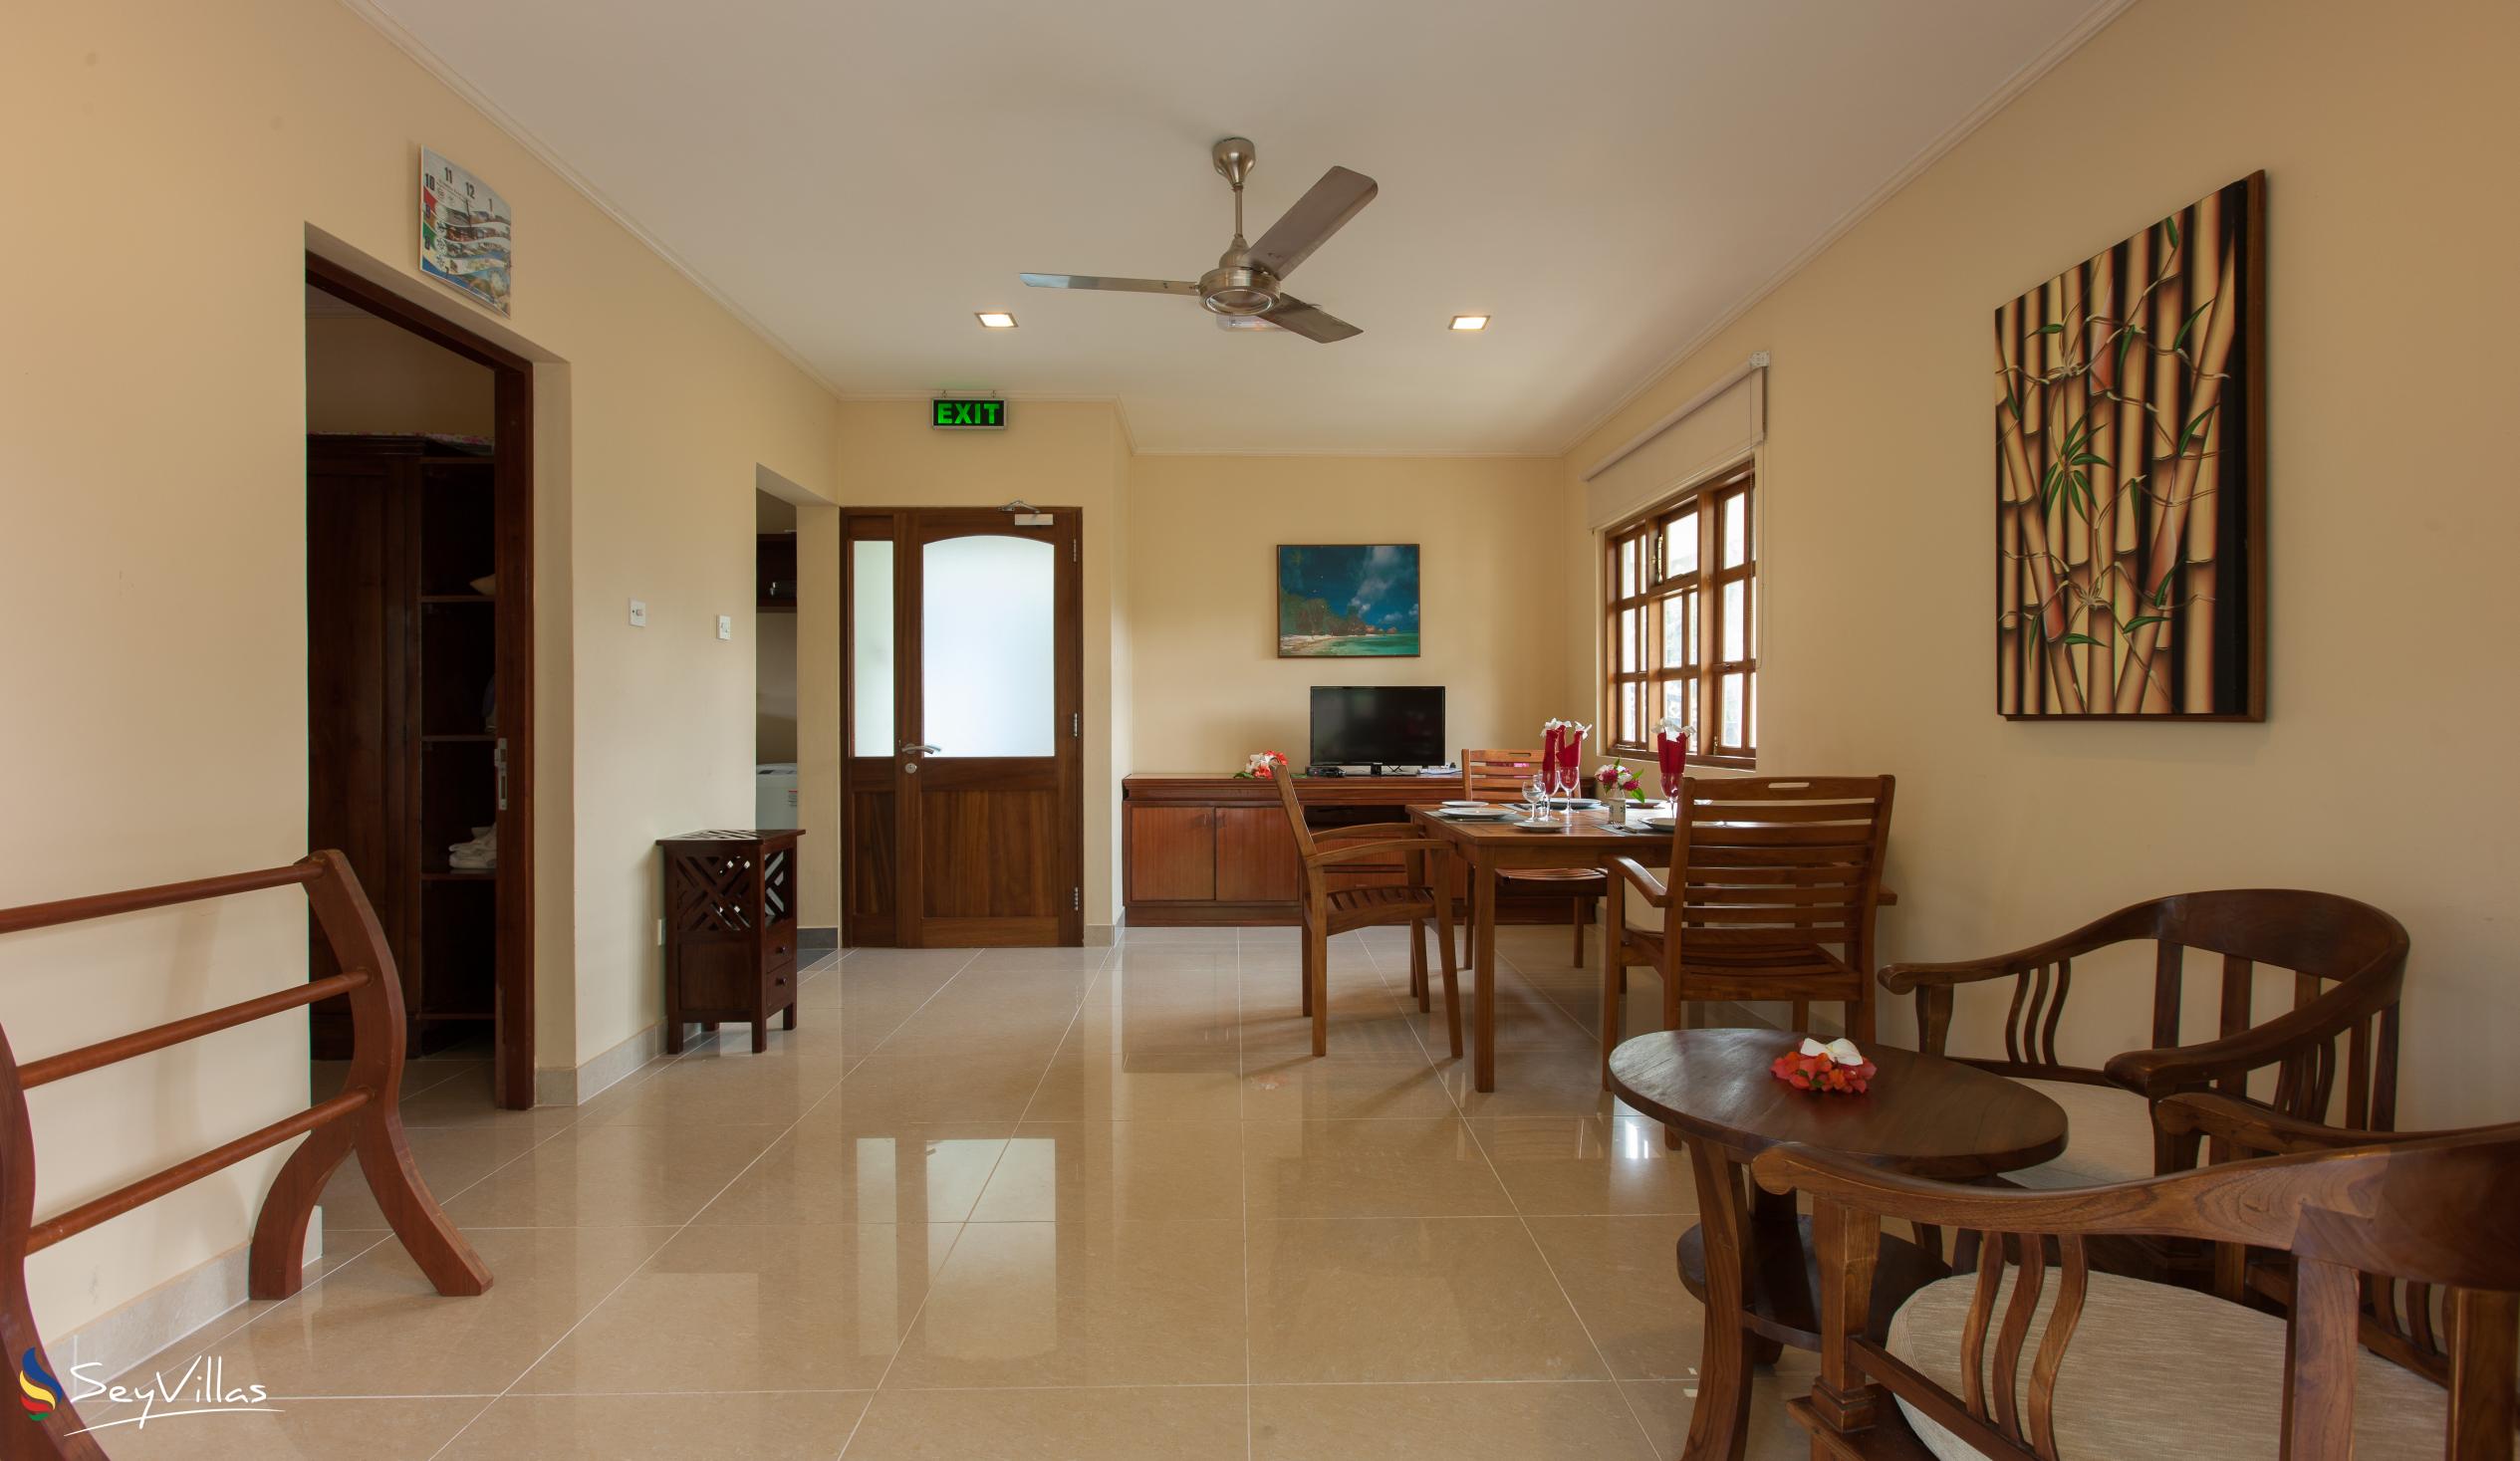 Foto 22: Le Relax Self Catering - Deluxe Appartement - La Digue (Seychelles)